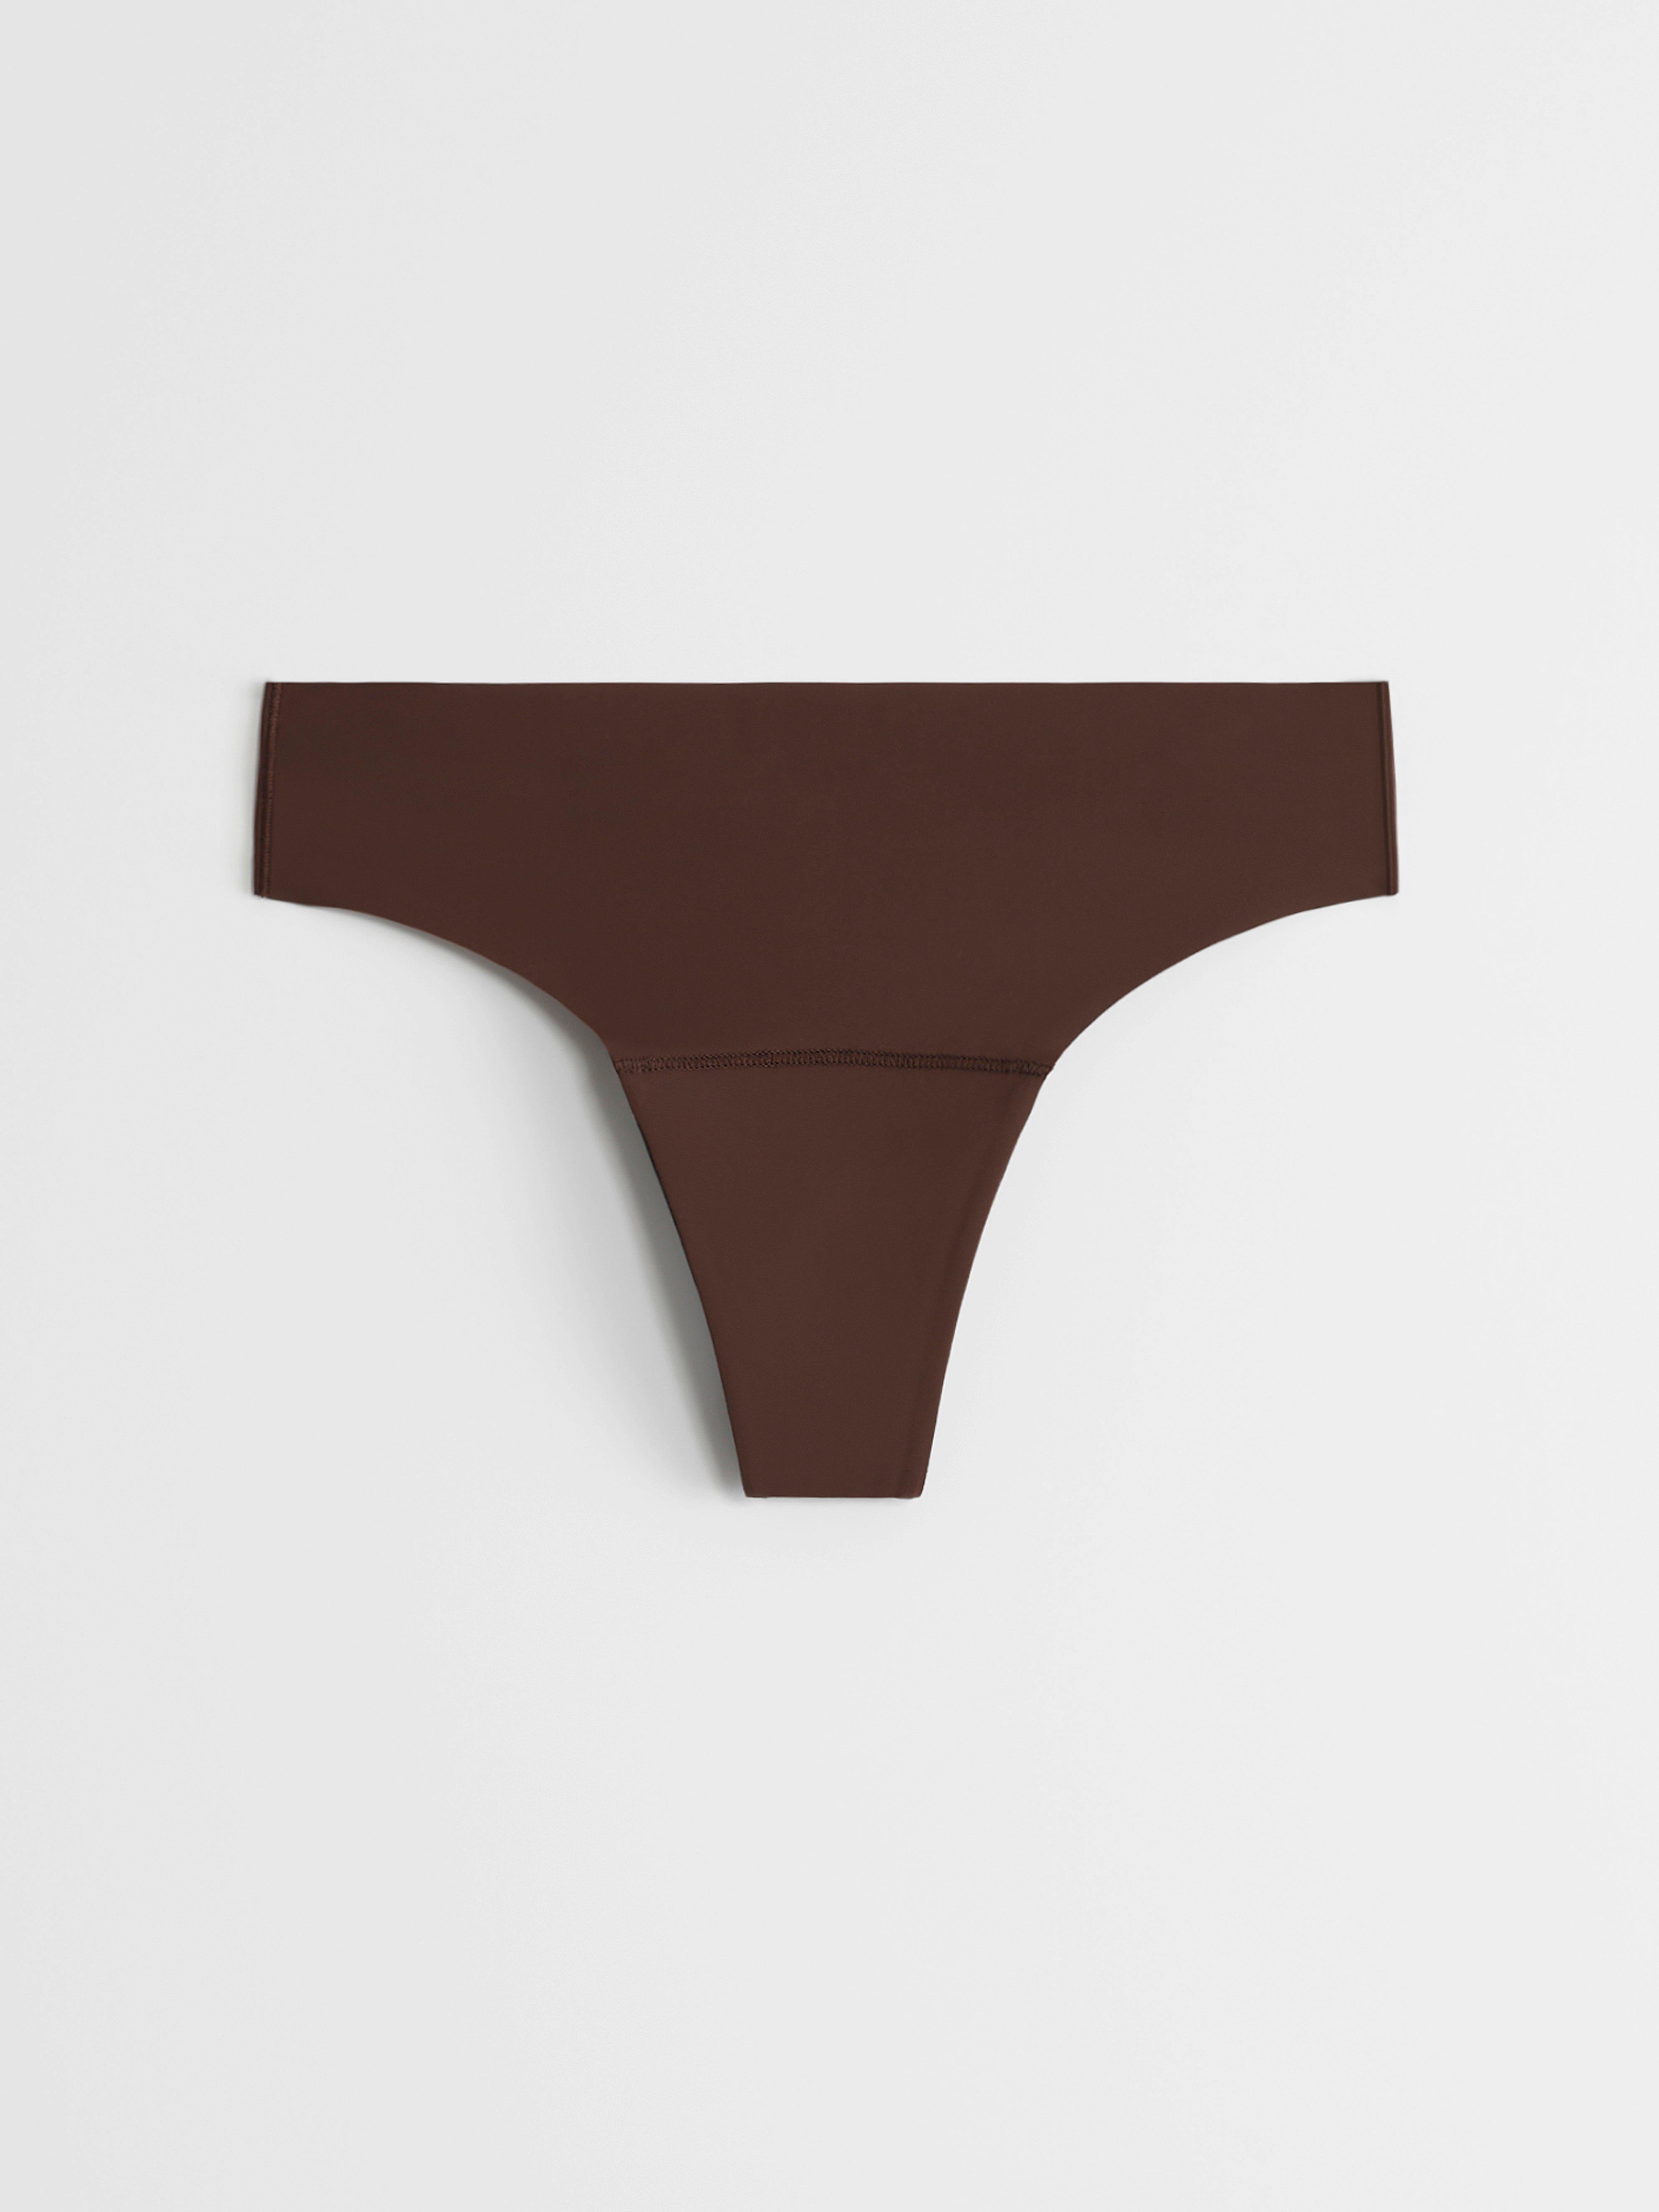 Period Panty Light Absorbency - Thong - Female Engineering